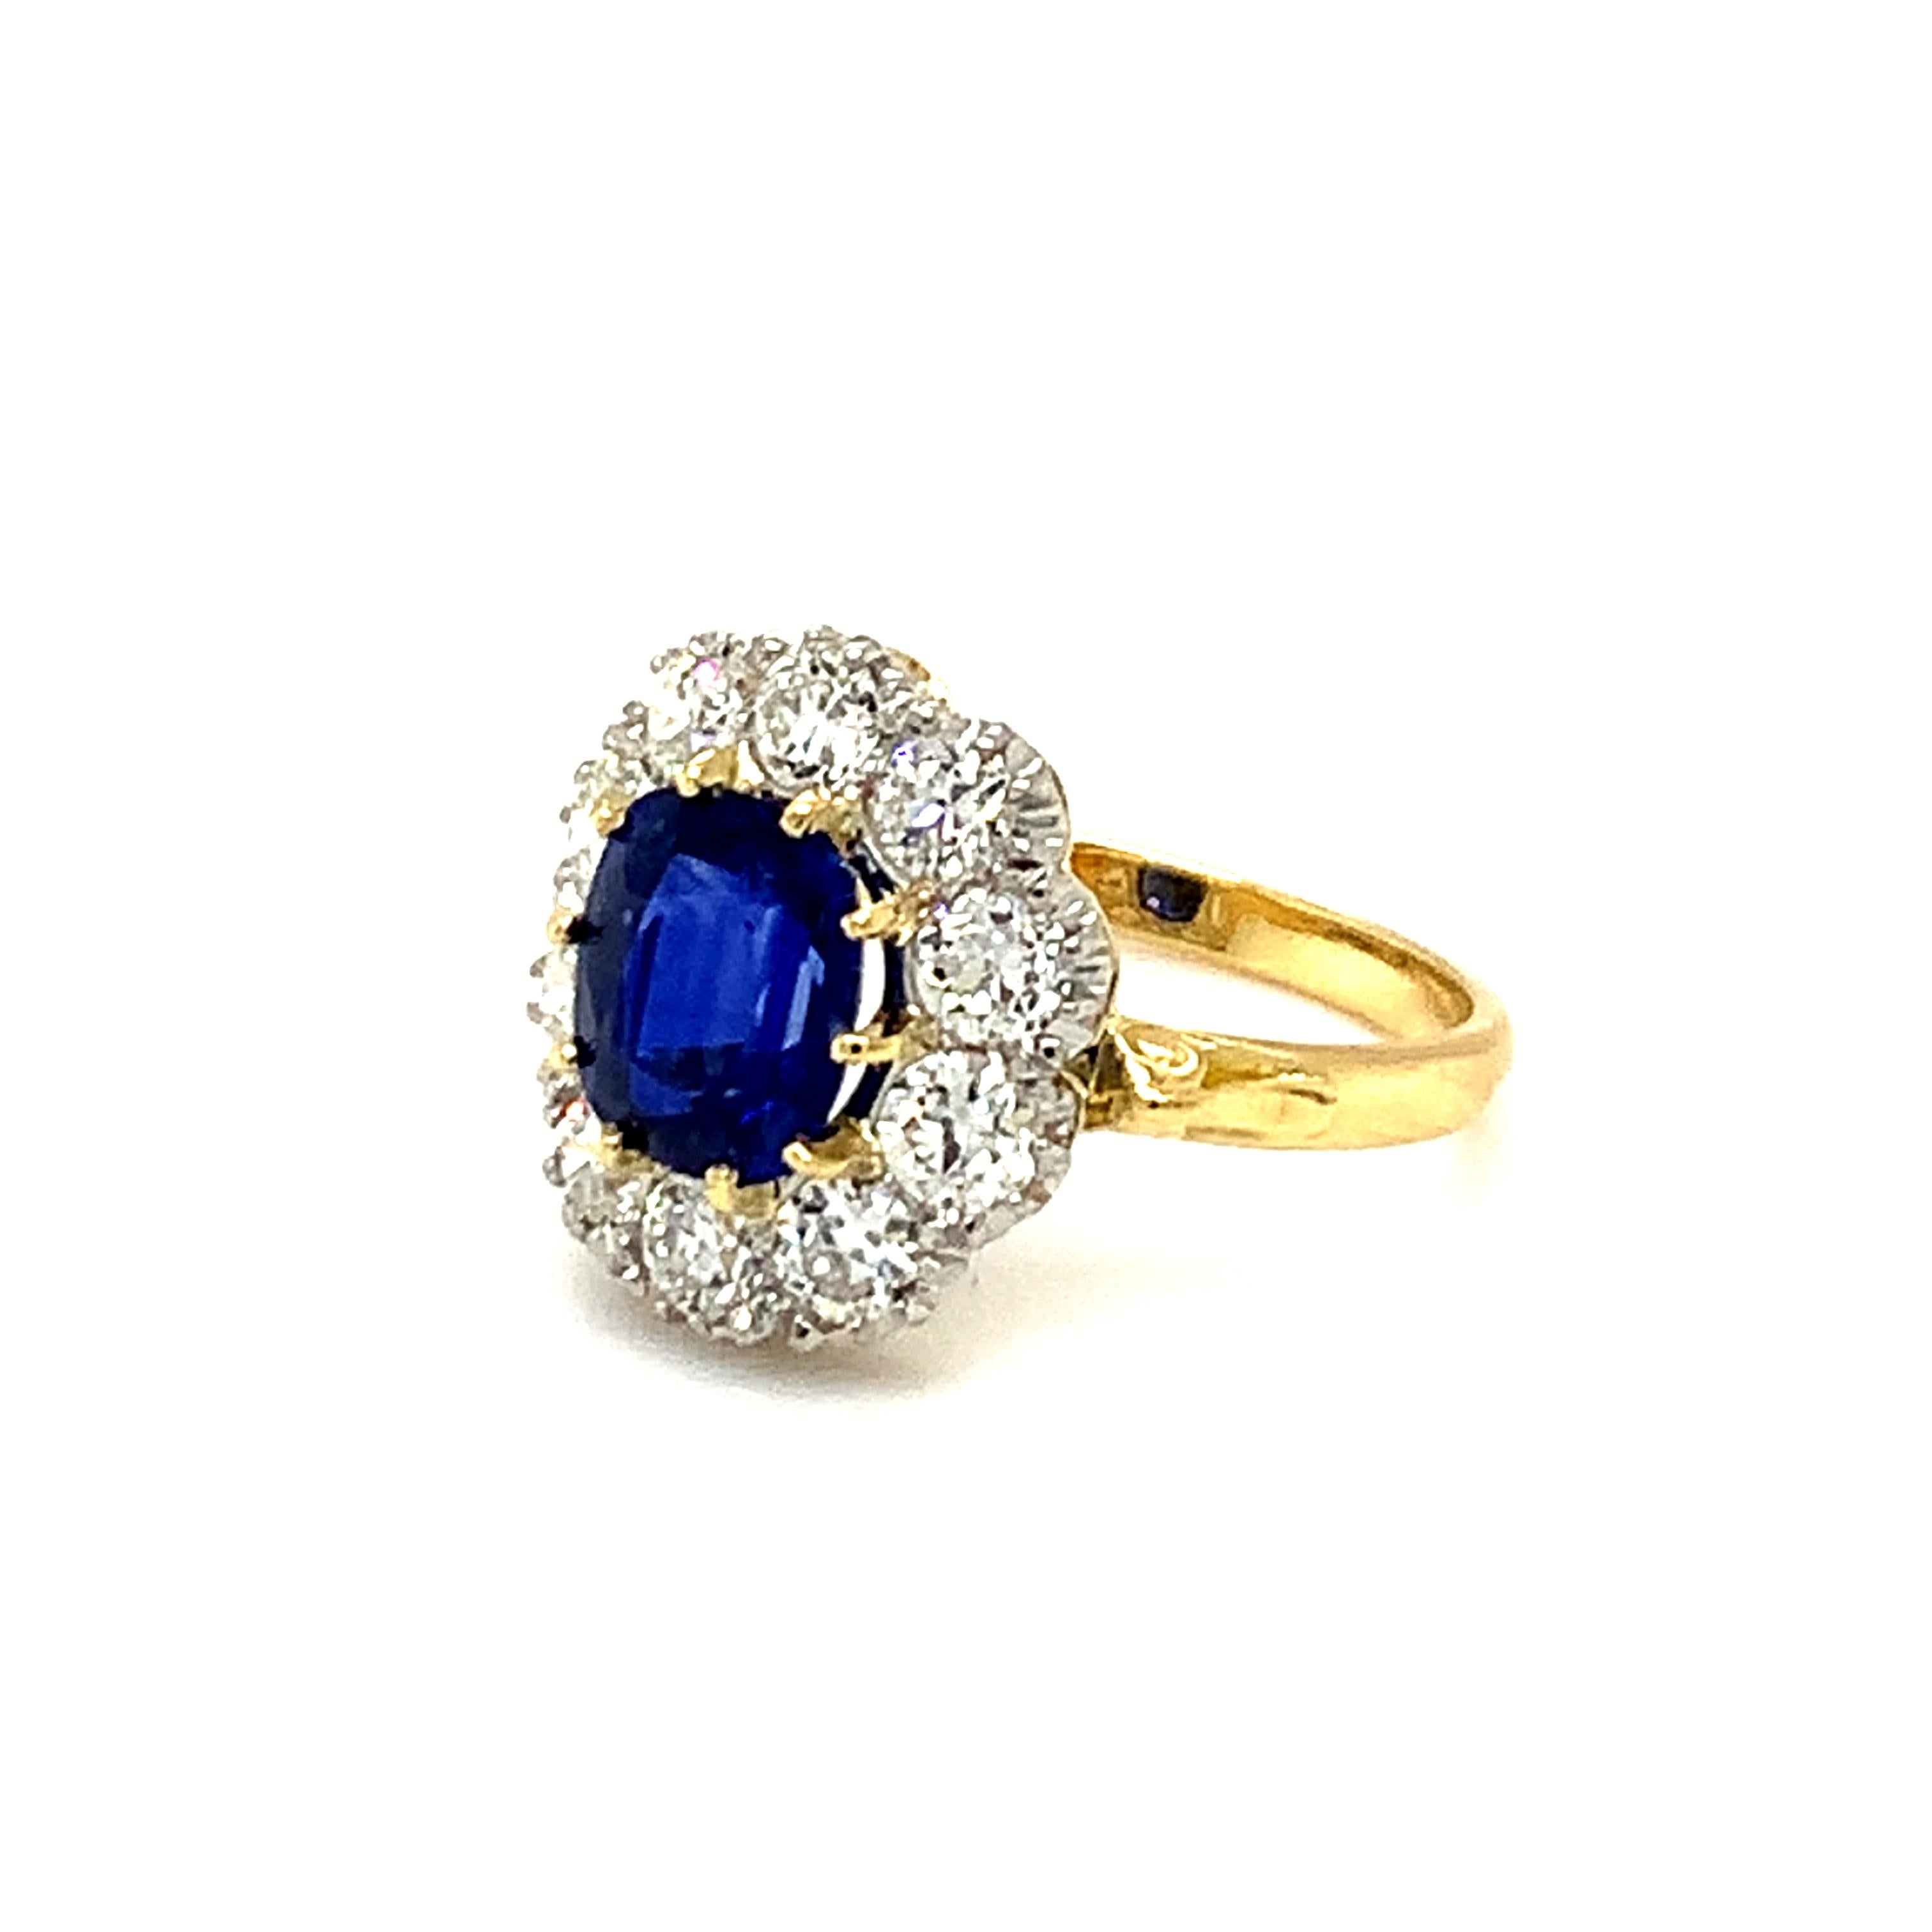 Stunning ultra fine cushion shaped Ceylon sapphire and old cut diamond cluster ring set in 18ct yellow gold and white gold. Modern ring made in Edwardian style, using old cut diamonds. Made by Joseph and Pearce in Sheffield, England.
Centre stone